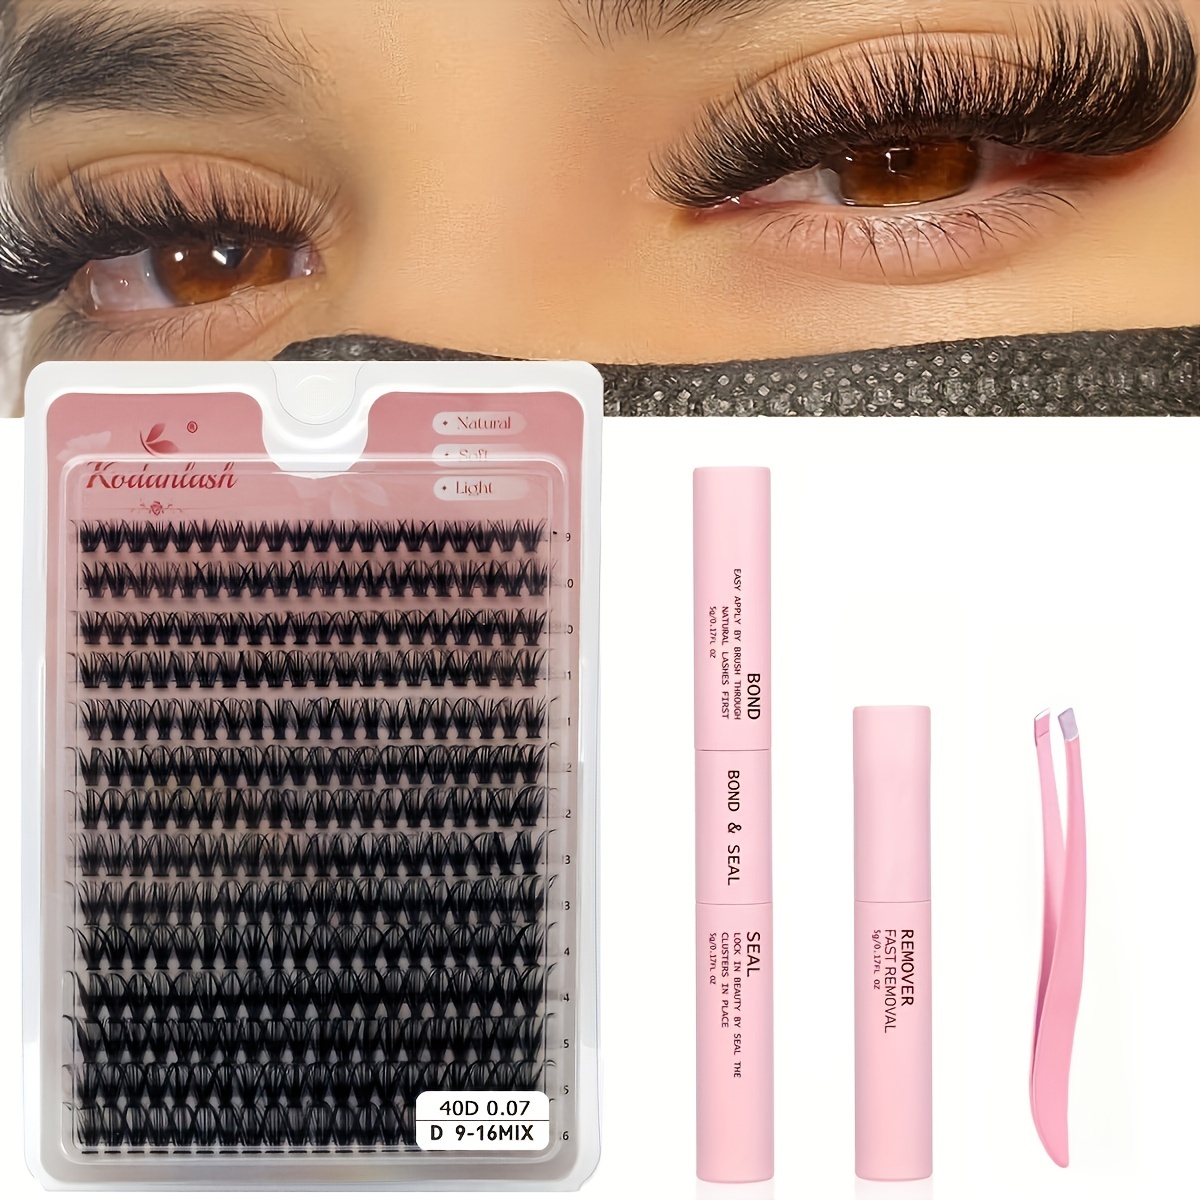 

Diy Lash Extension Kit, Lash Cluster 280 Pcs With Strong Hold Lash And Seal And Cluster Eyelashes Applicator Tool Eyelash Extensions Kit For Self Applicator At Home